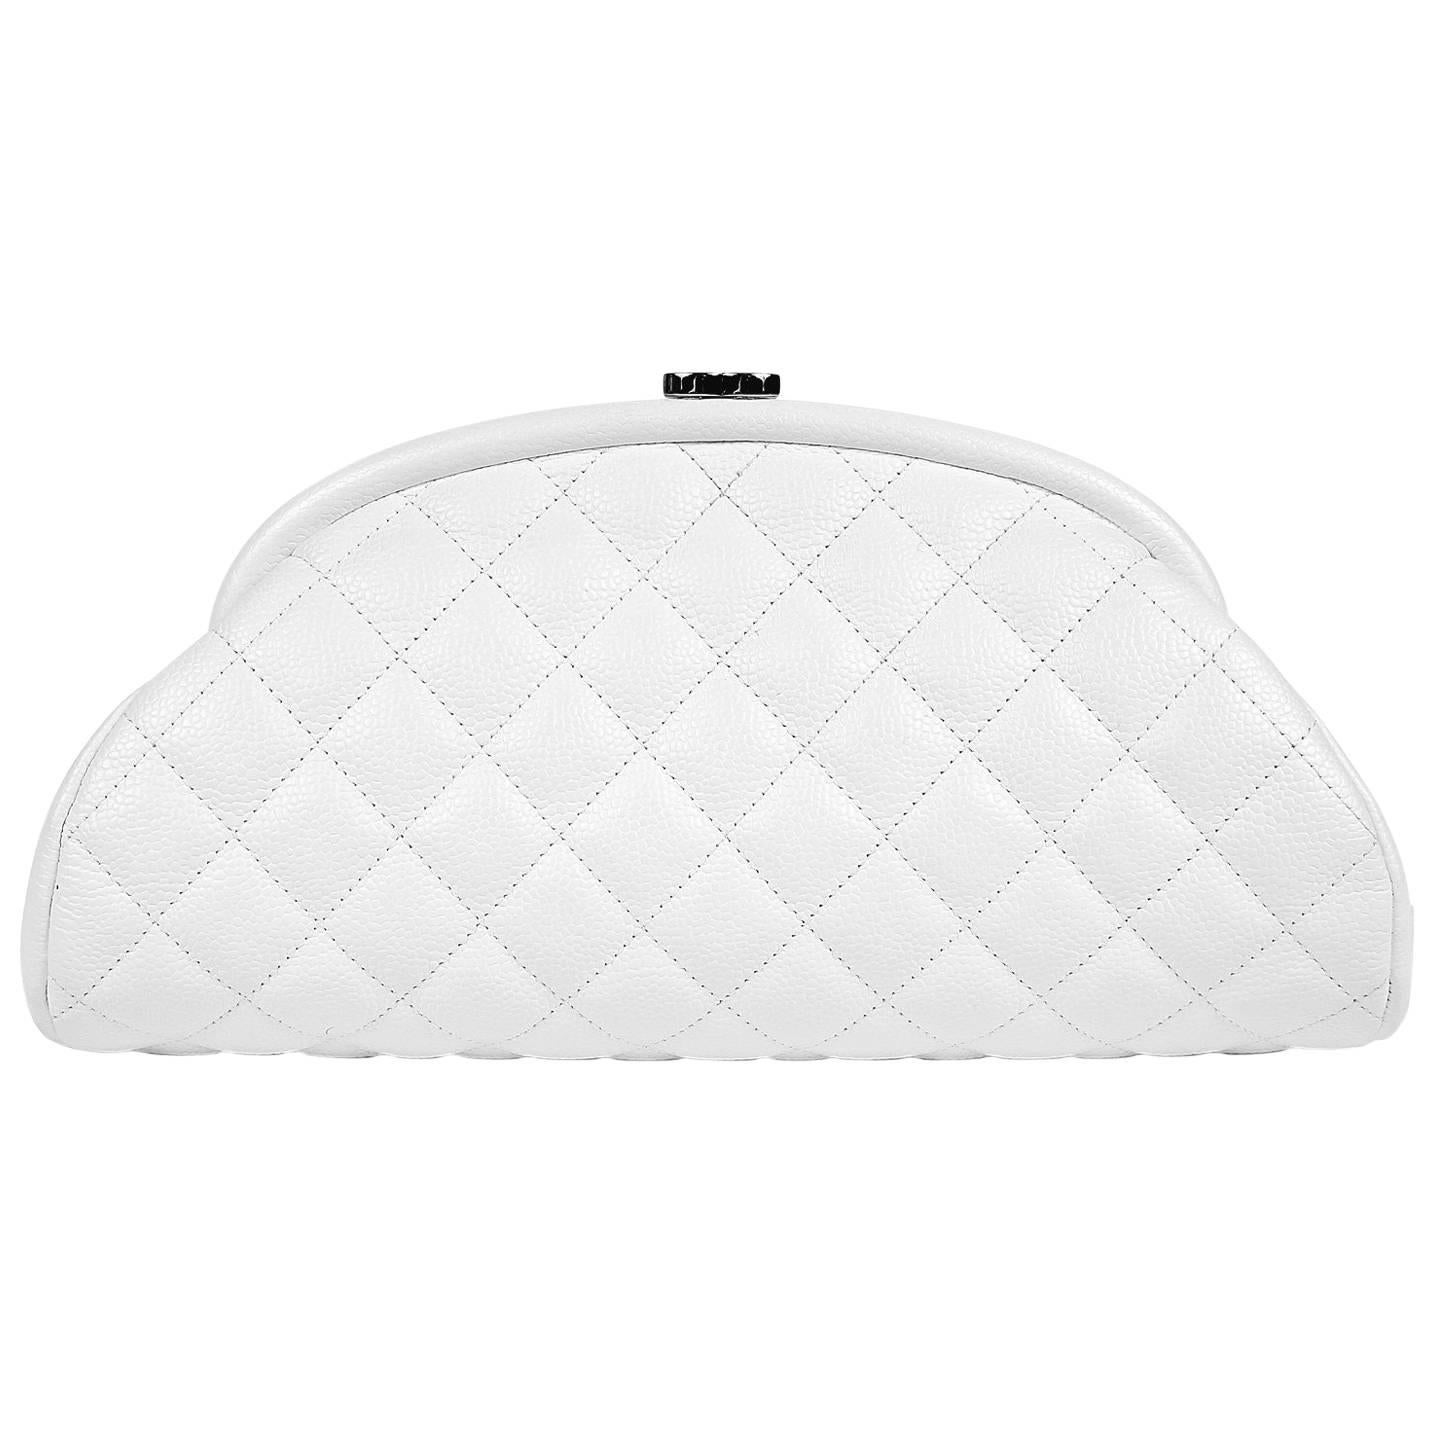 Chanel White Caviar Leather Timeless Clutch with Silver Hardware